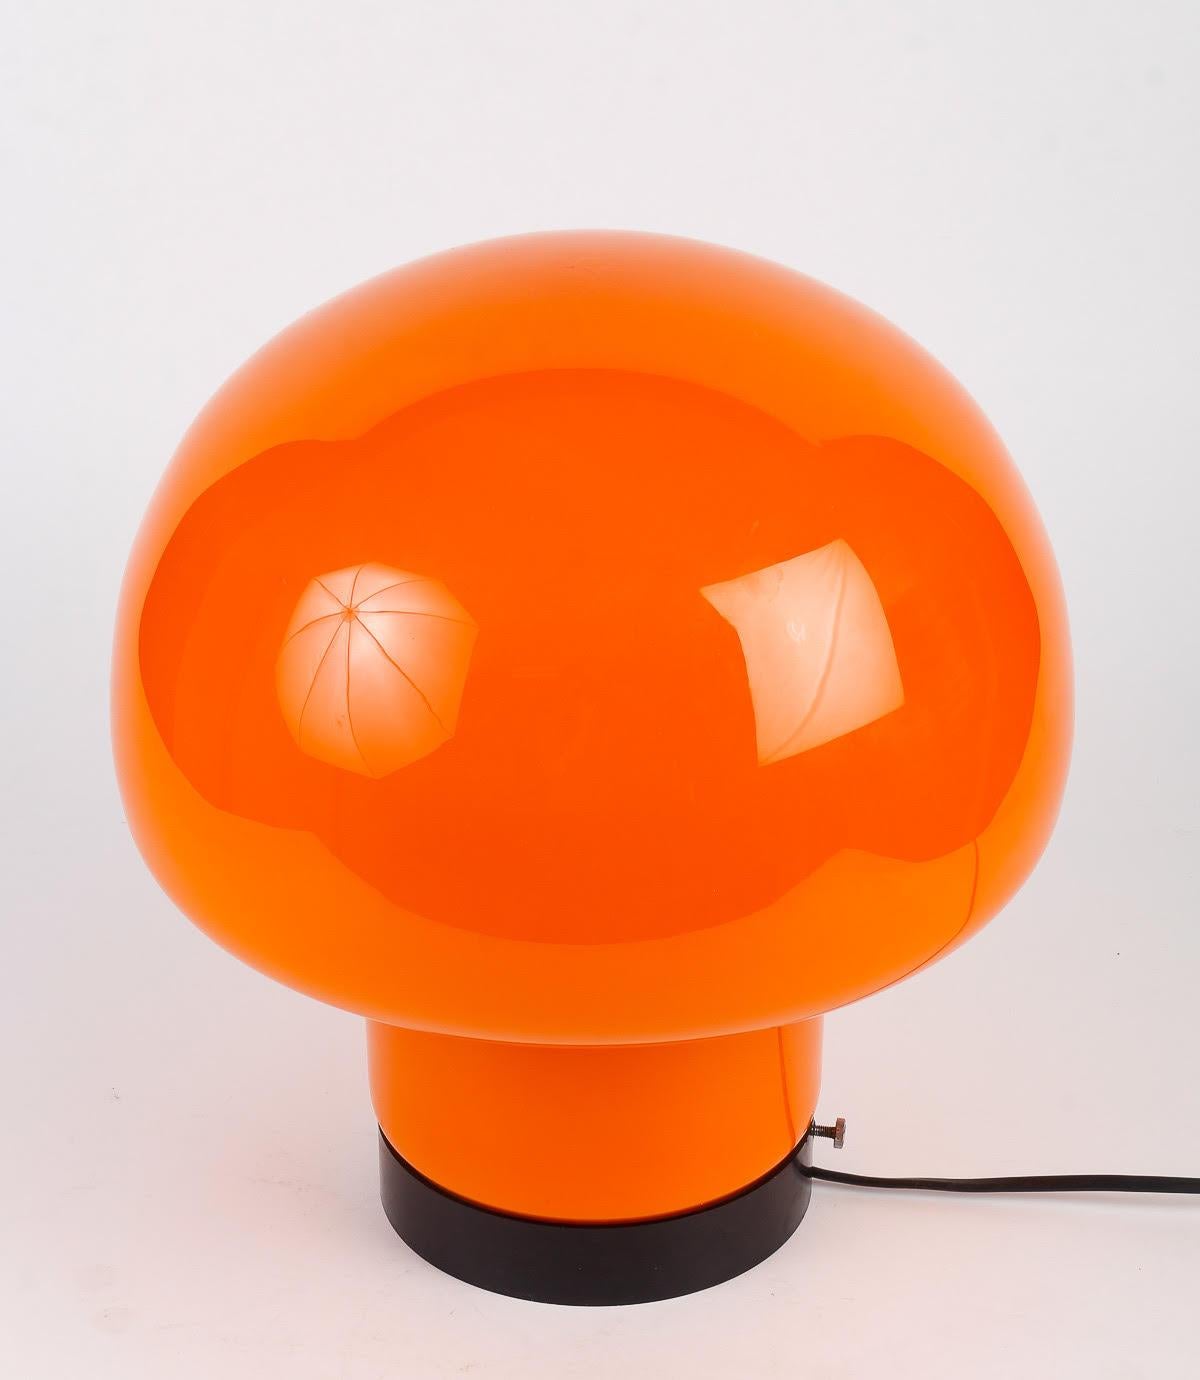 Mushroom Lamp 1970's Design.

Mushroom lamp from the 1970s, part of the Space Age movement.    
h: 36cm , w: 33cm, d: 15cm